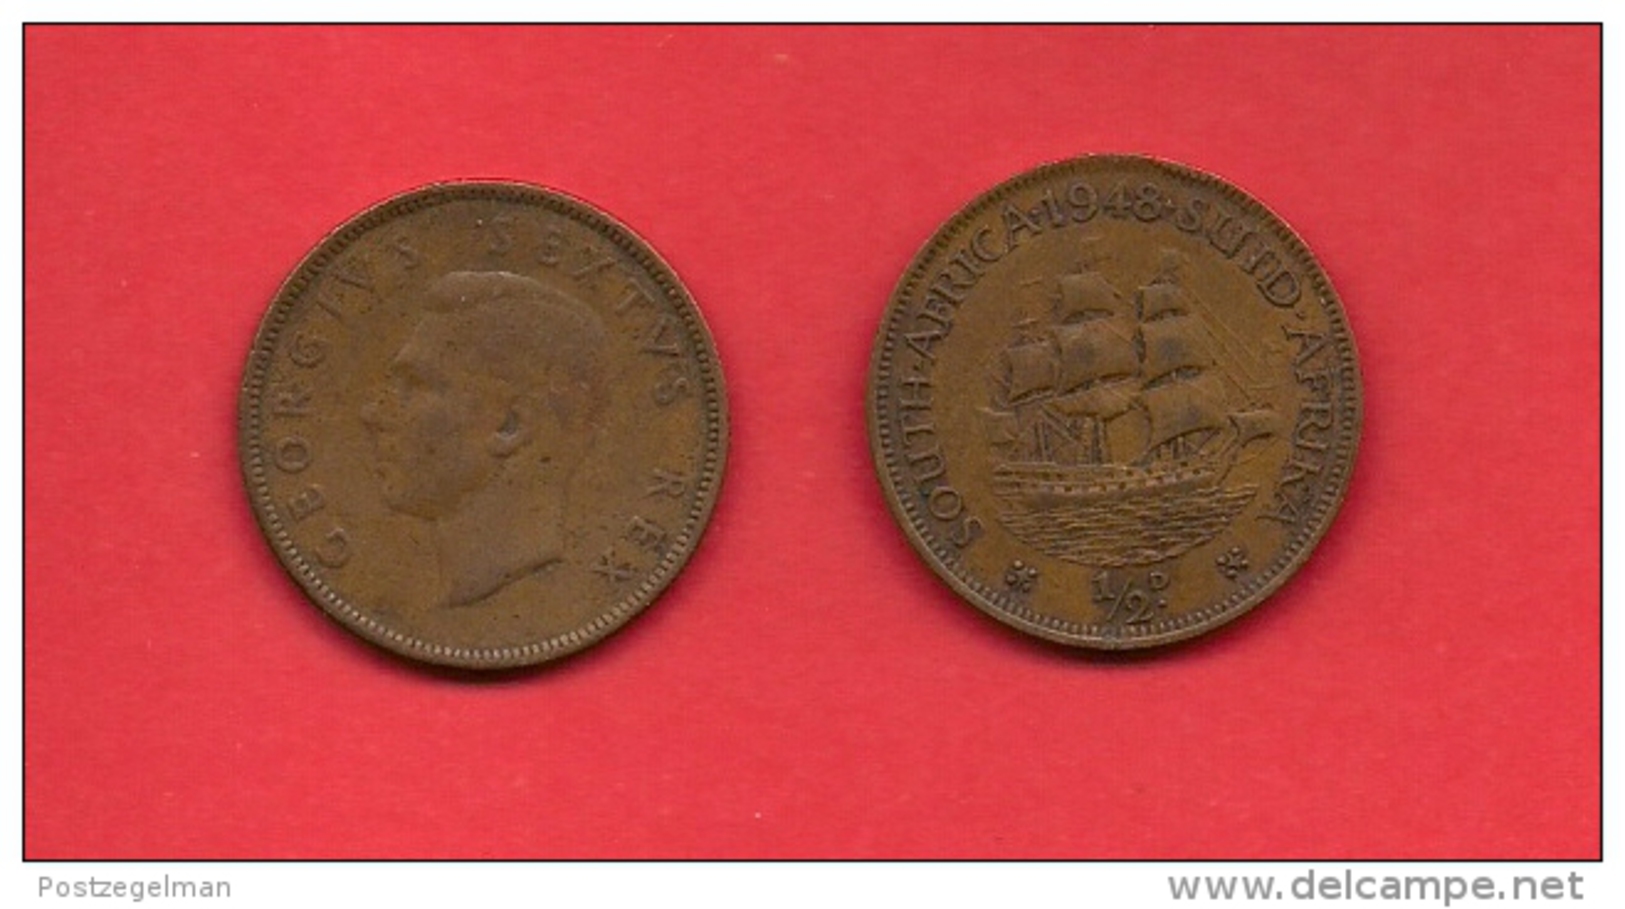 SOUTH AFRICA, 1948,  Circulated Coin, 1/2 Penny, George VI, Km 33, C1402 - South Africa